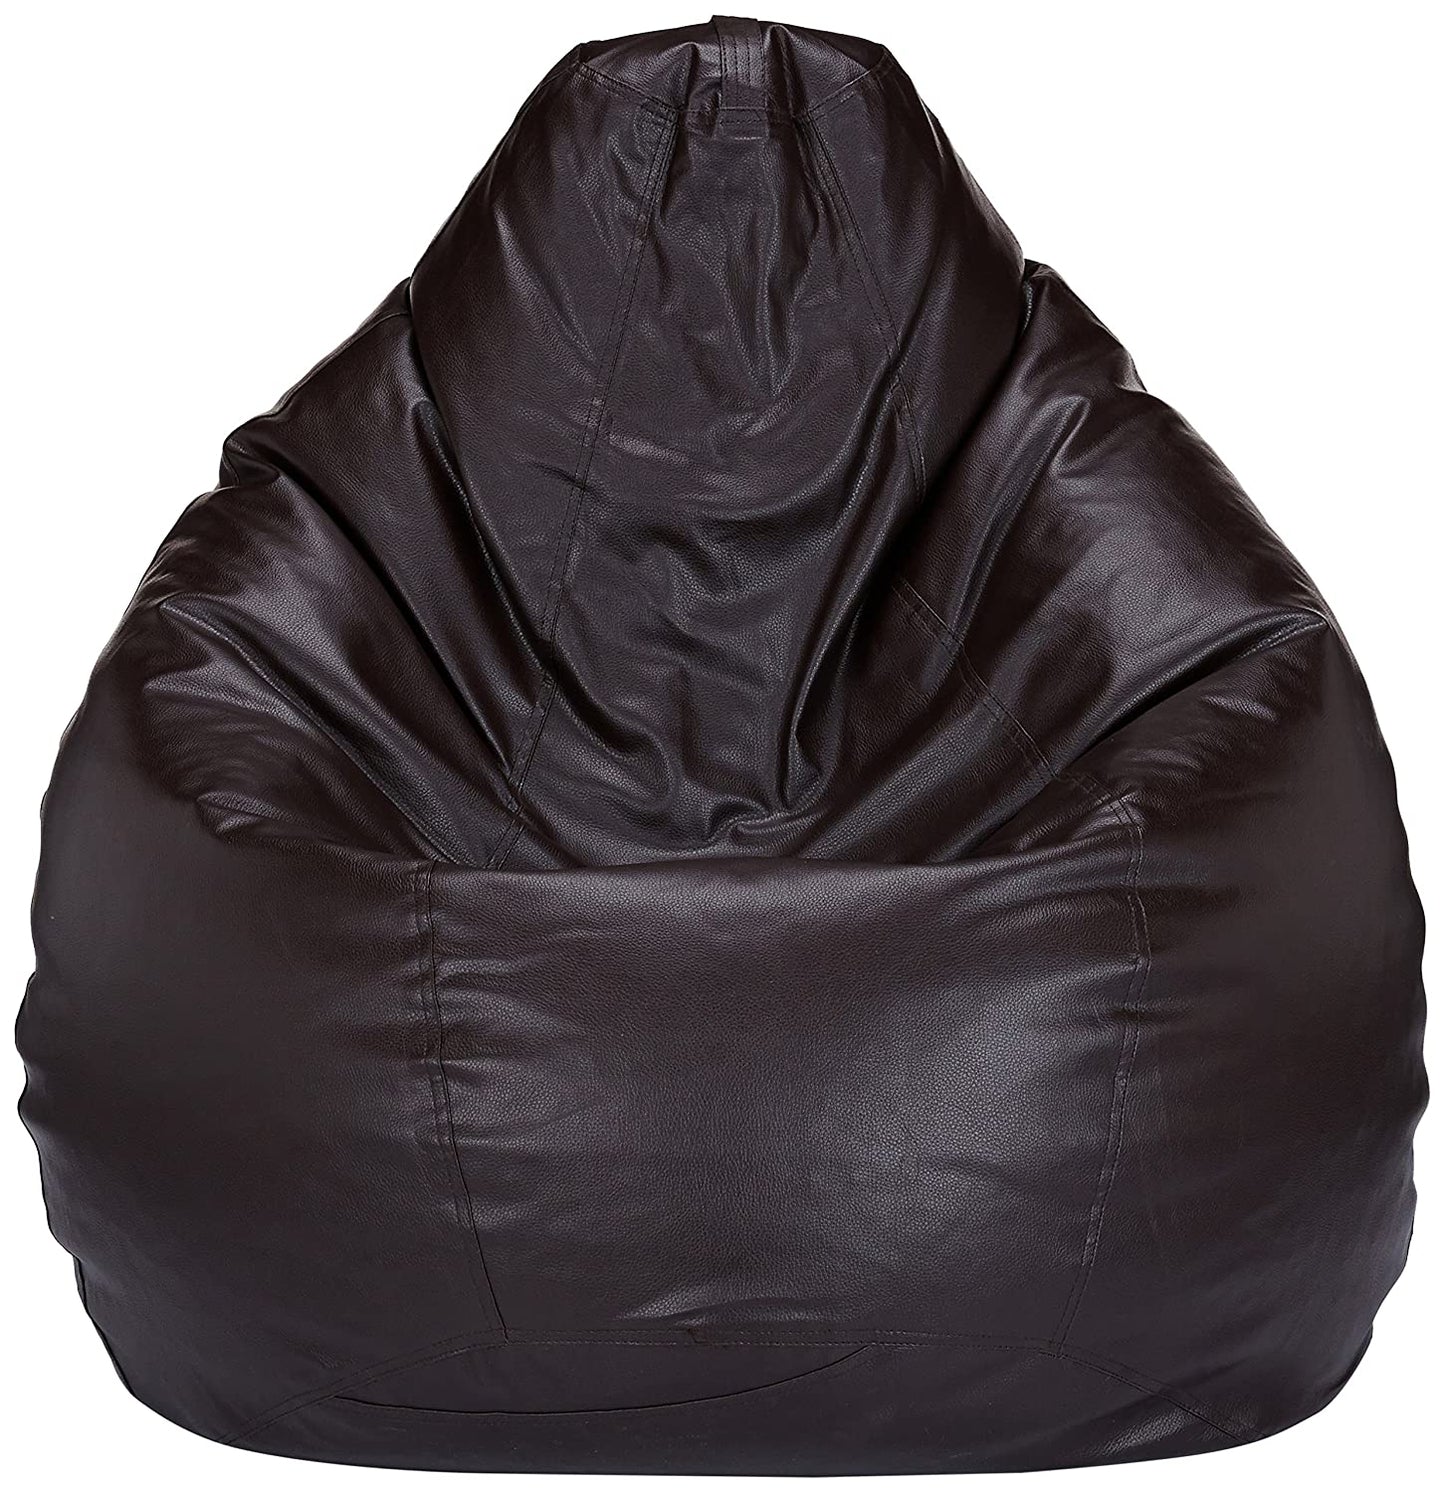 HDC Super Lama Leather Bean Bag Cover Without Beans (Brown) - HDC.IN